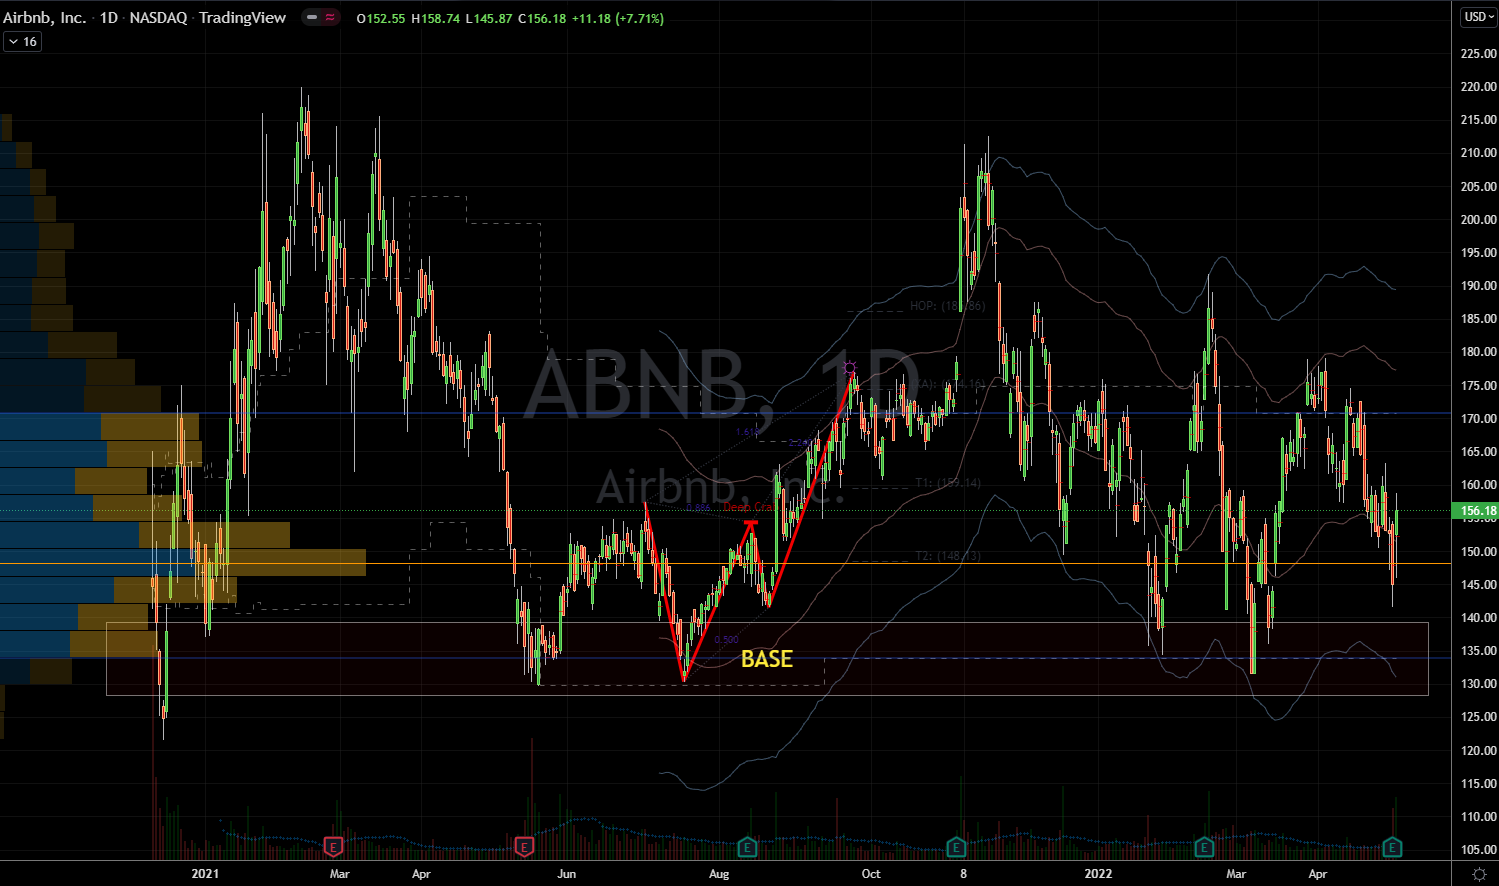 Stocks to Buy: Airbnb (ABNB) Stock Chart Showing Rebound Potential